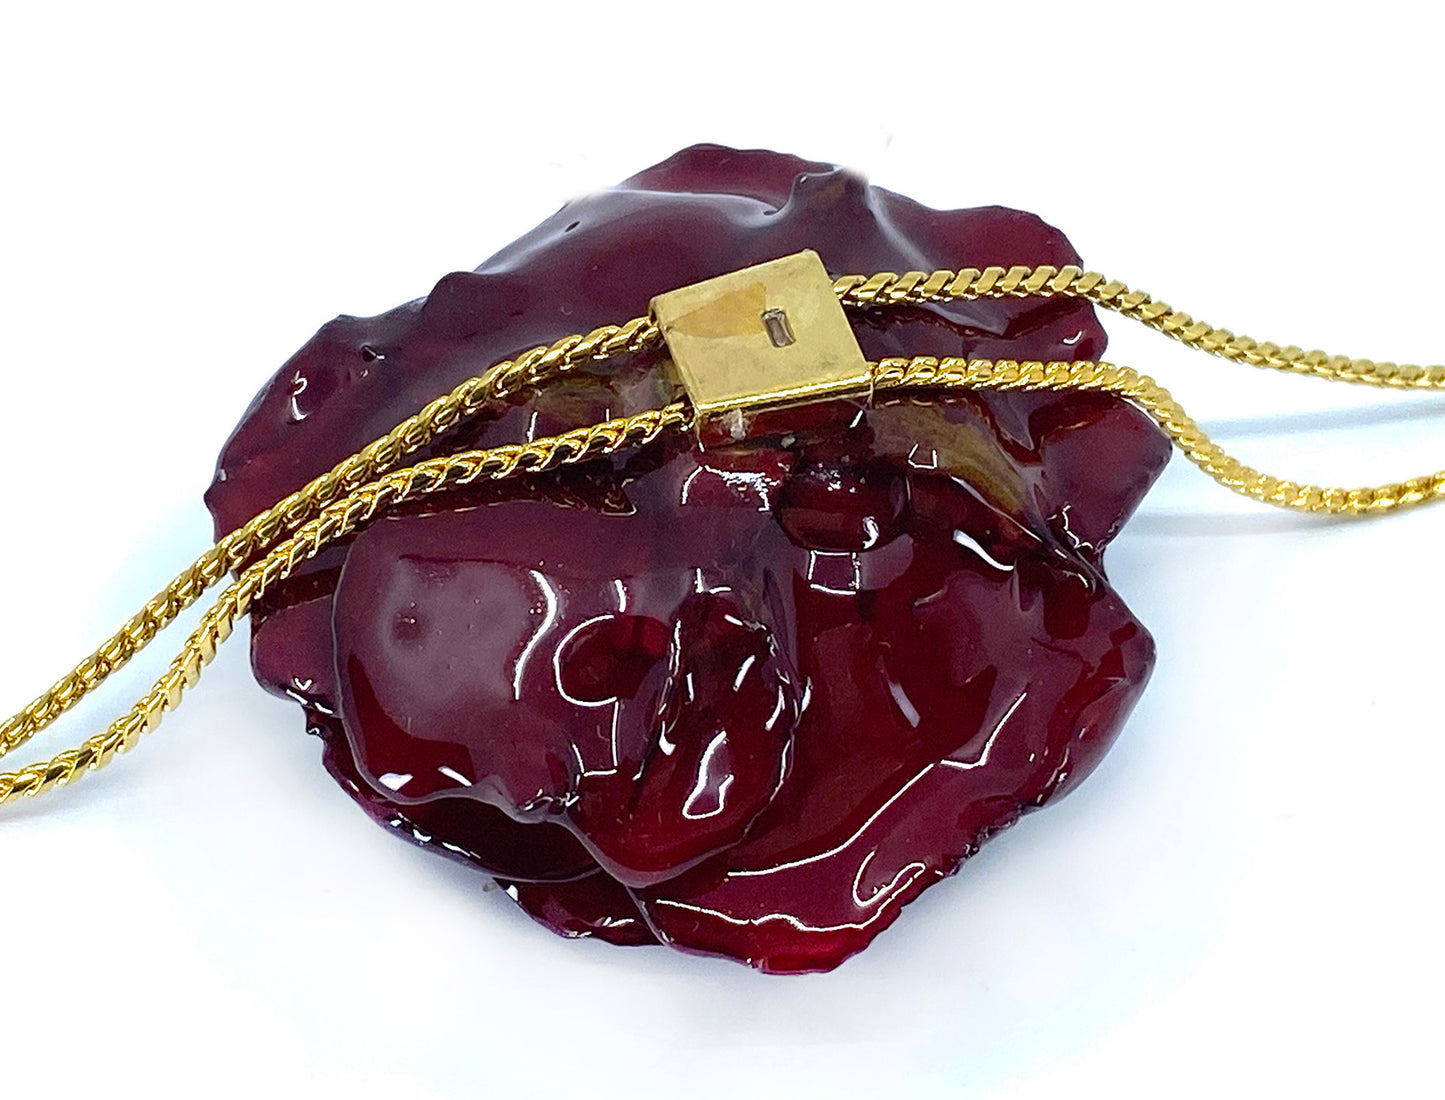 Mini Rose Mini 1.5-2.25 inch Pendant Necklace 18 inch Gold Plated 24K (Red Burgundy)